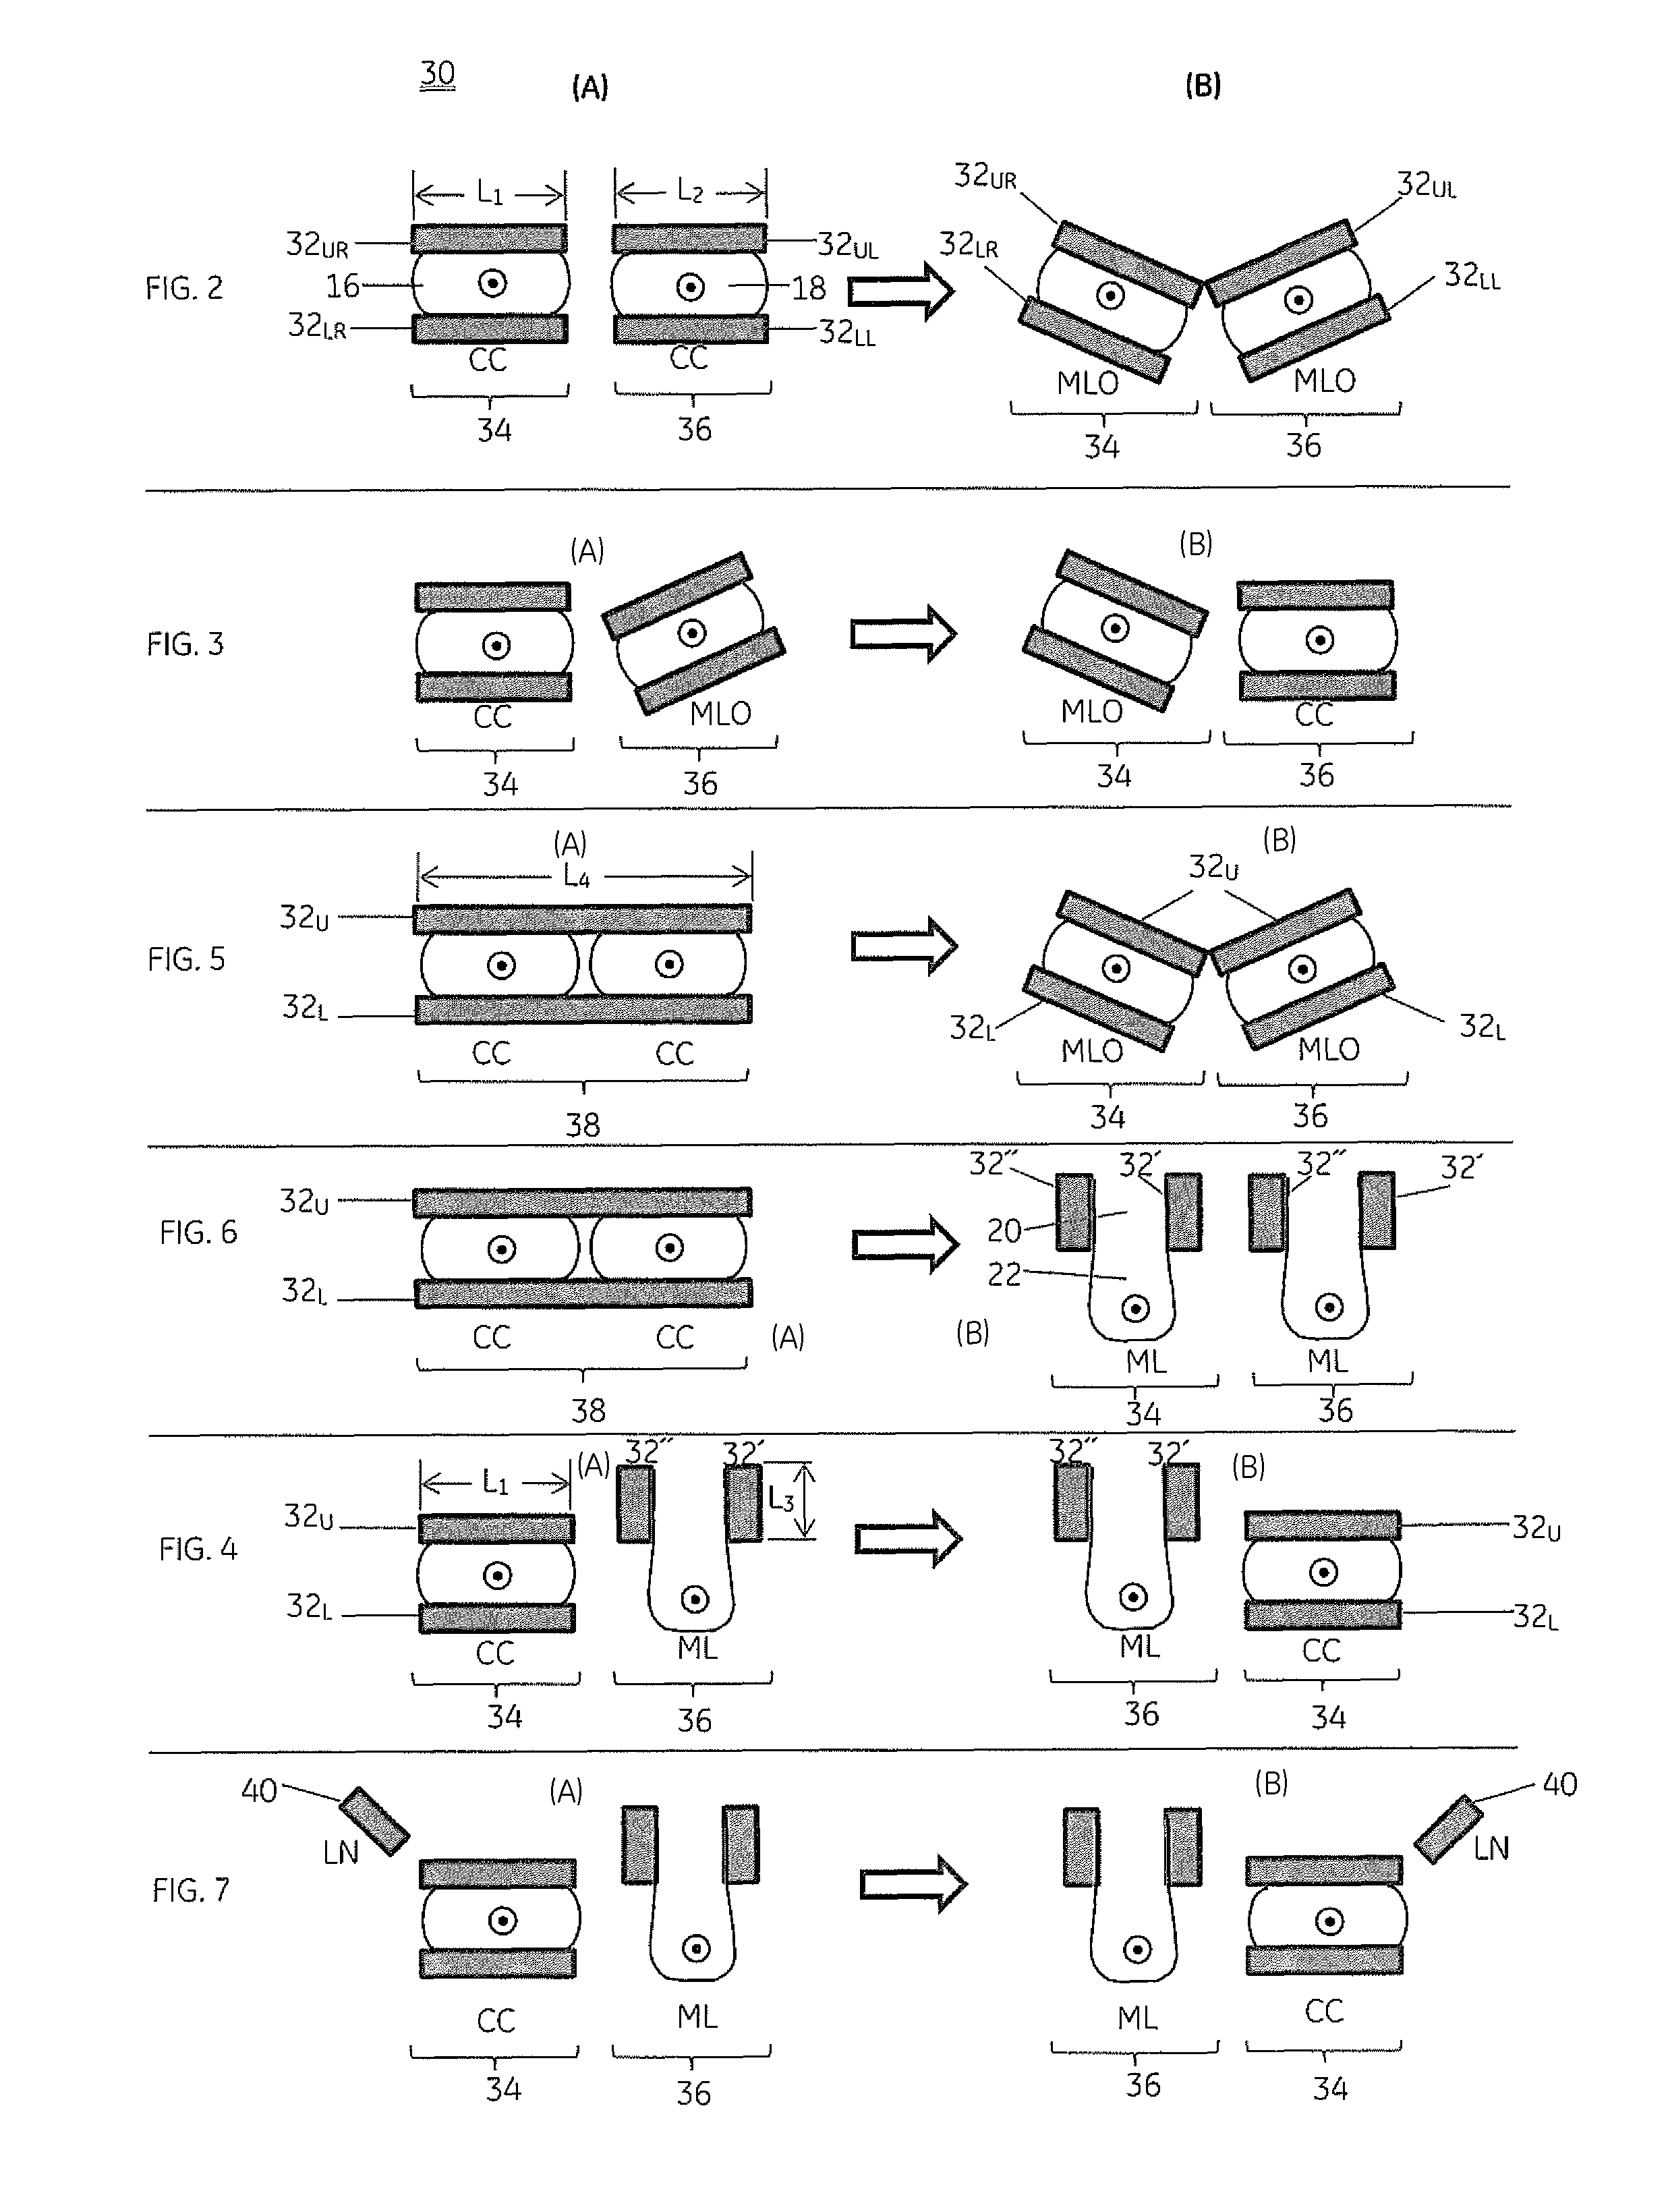 Apparatus and method for reducing examination time in molecular breast imaging